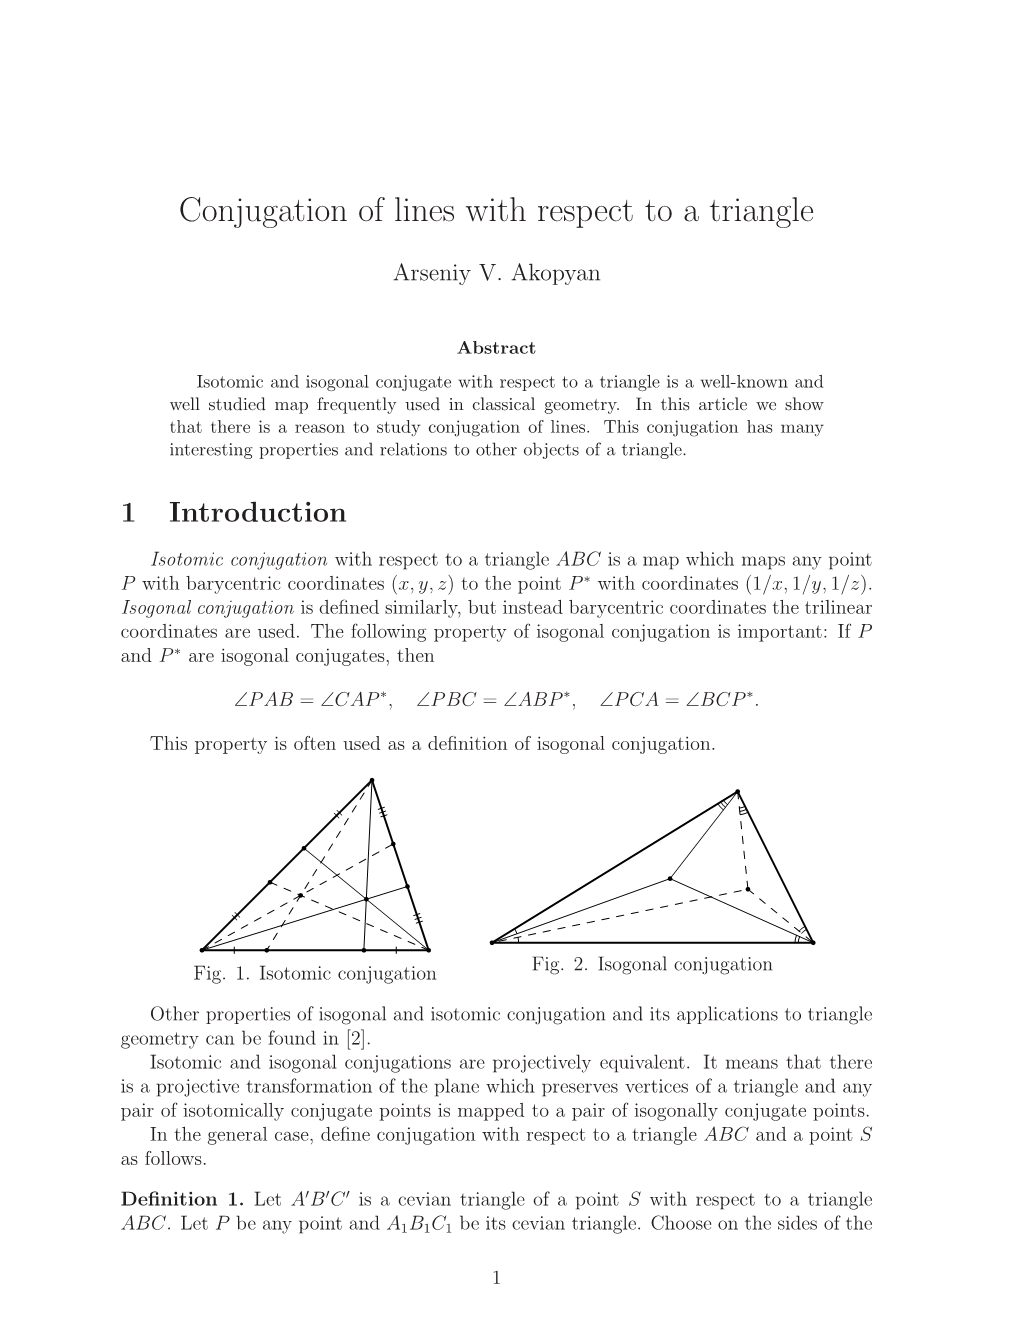 Conjugation of Lines with Respect to a Triangle